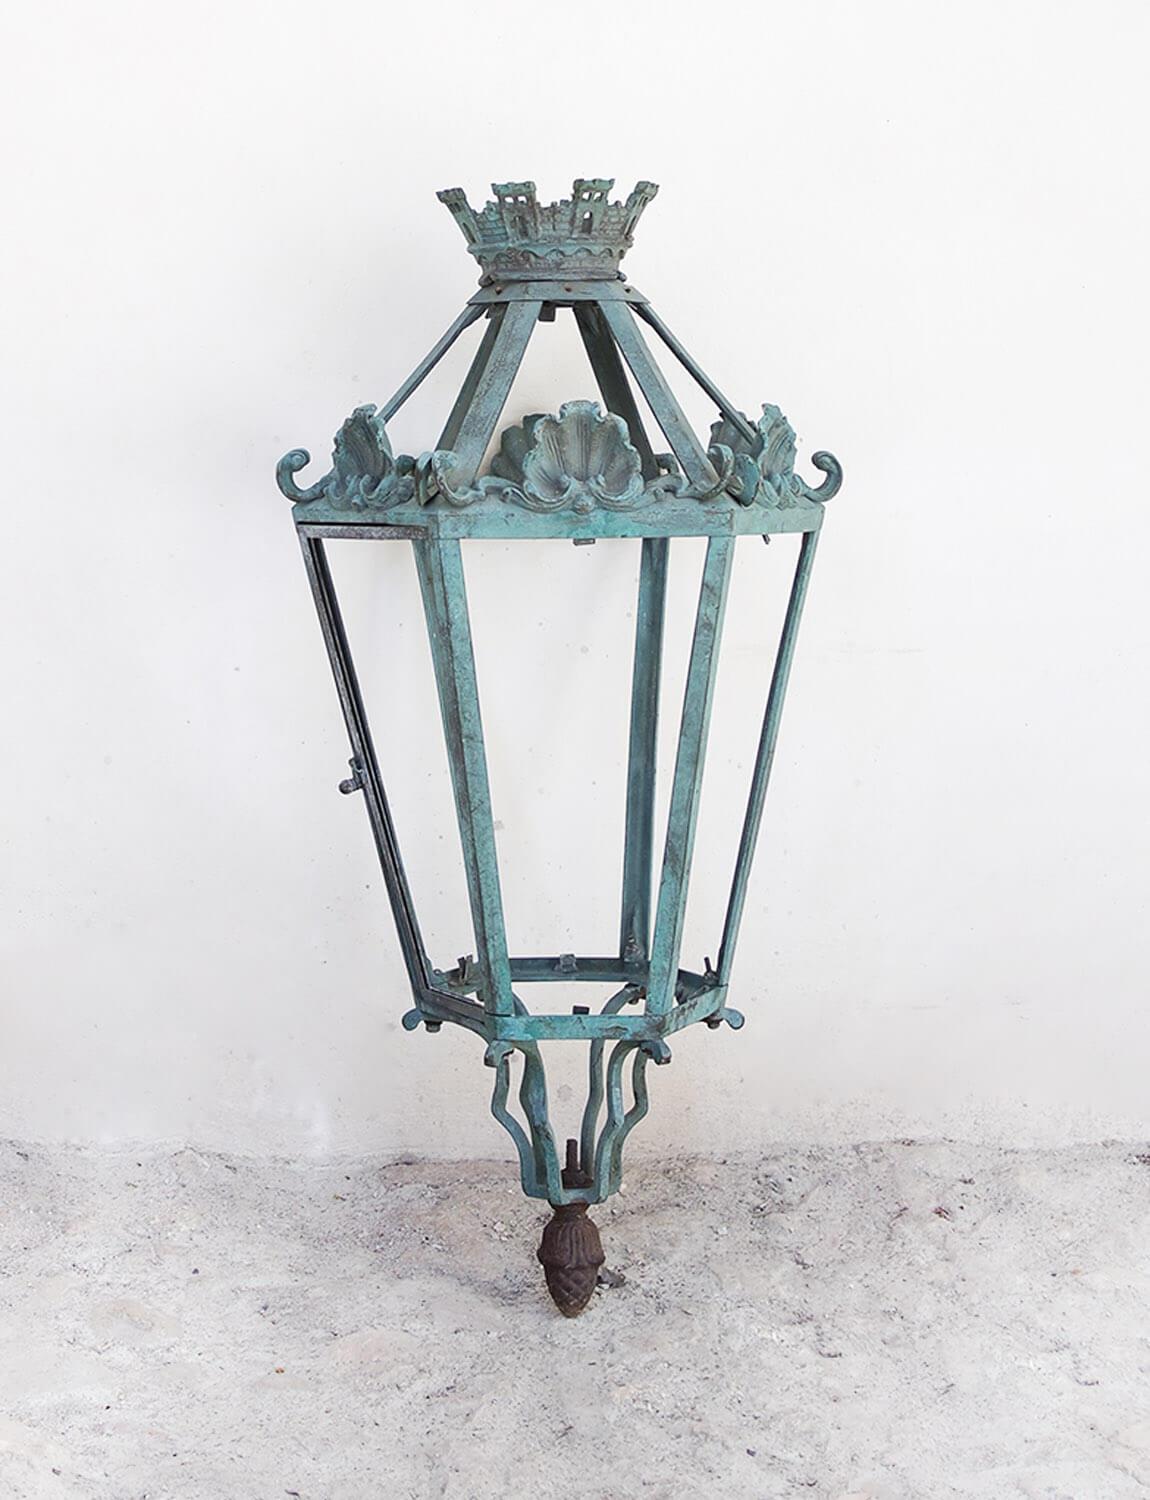 Salvaged from a castle here in Tuscany, this wonderful 19th century wrought iron metal lantern has shell and castellated motifs. The front of the lantern has a working door which opens to replace a candle or lightbulb. This piece would look amazing